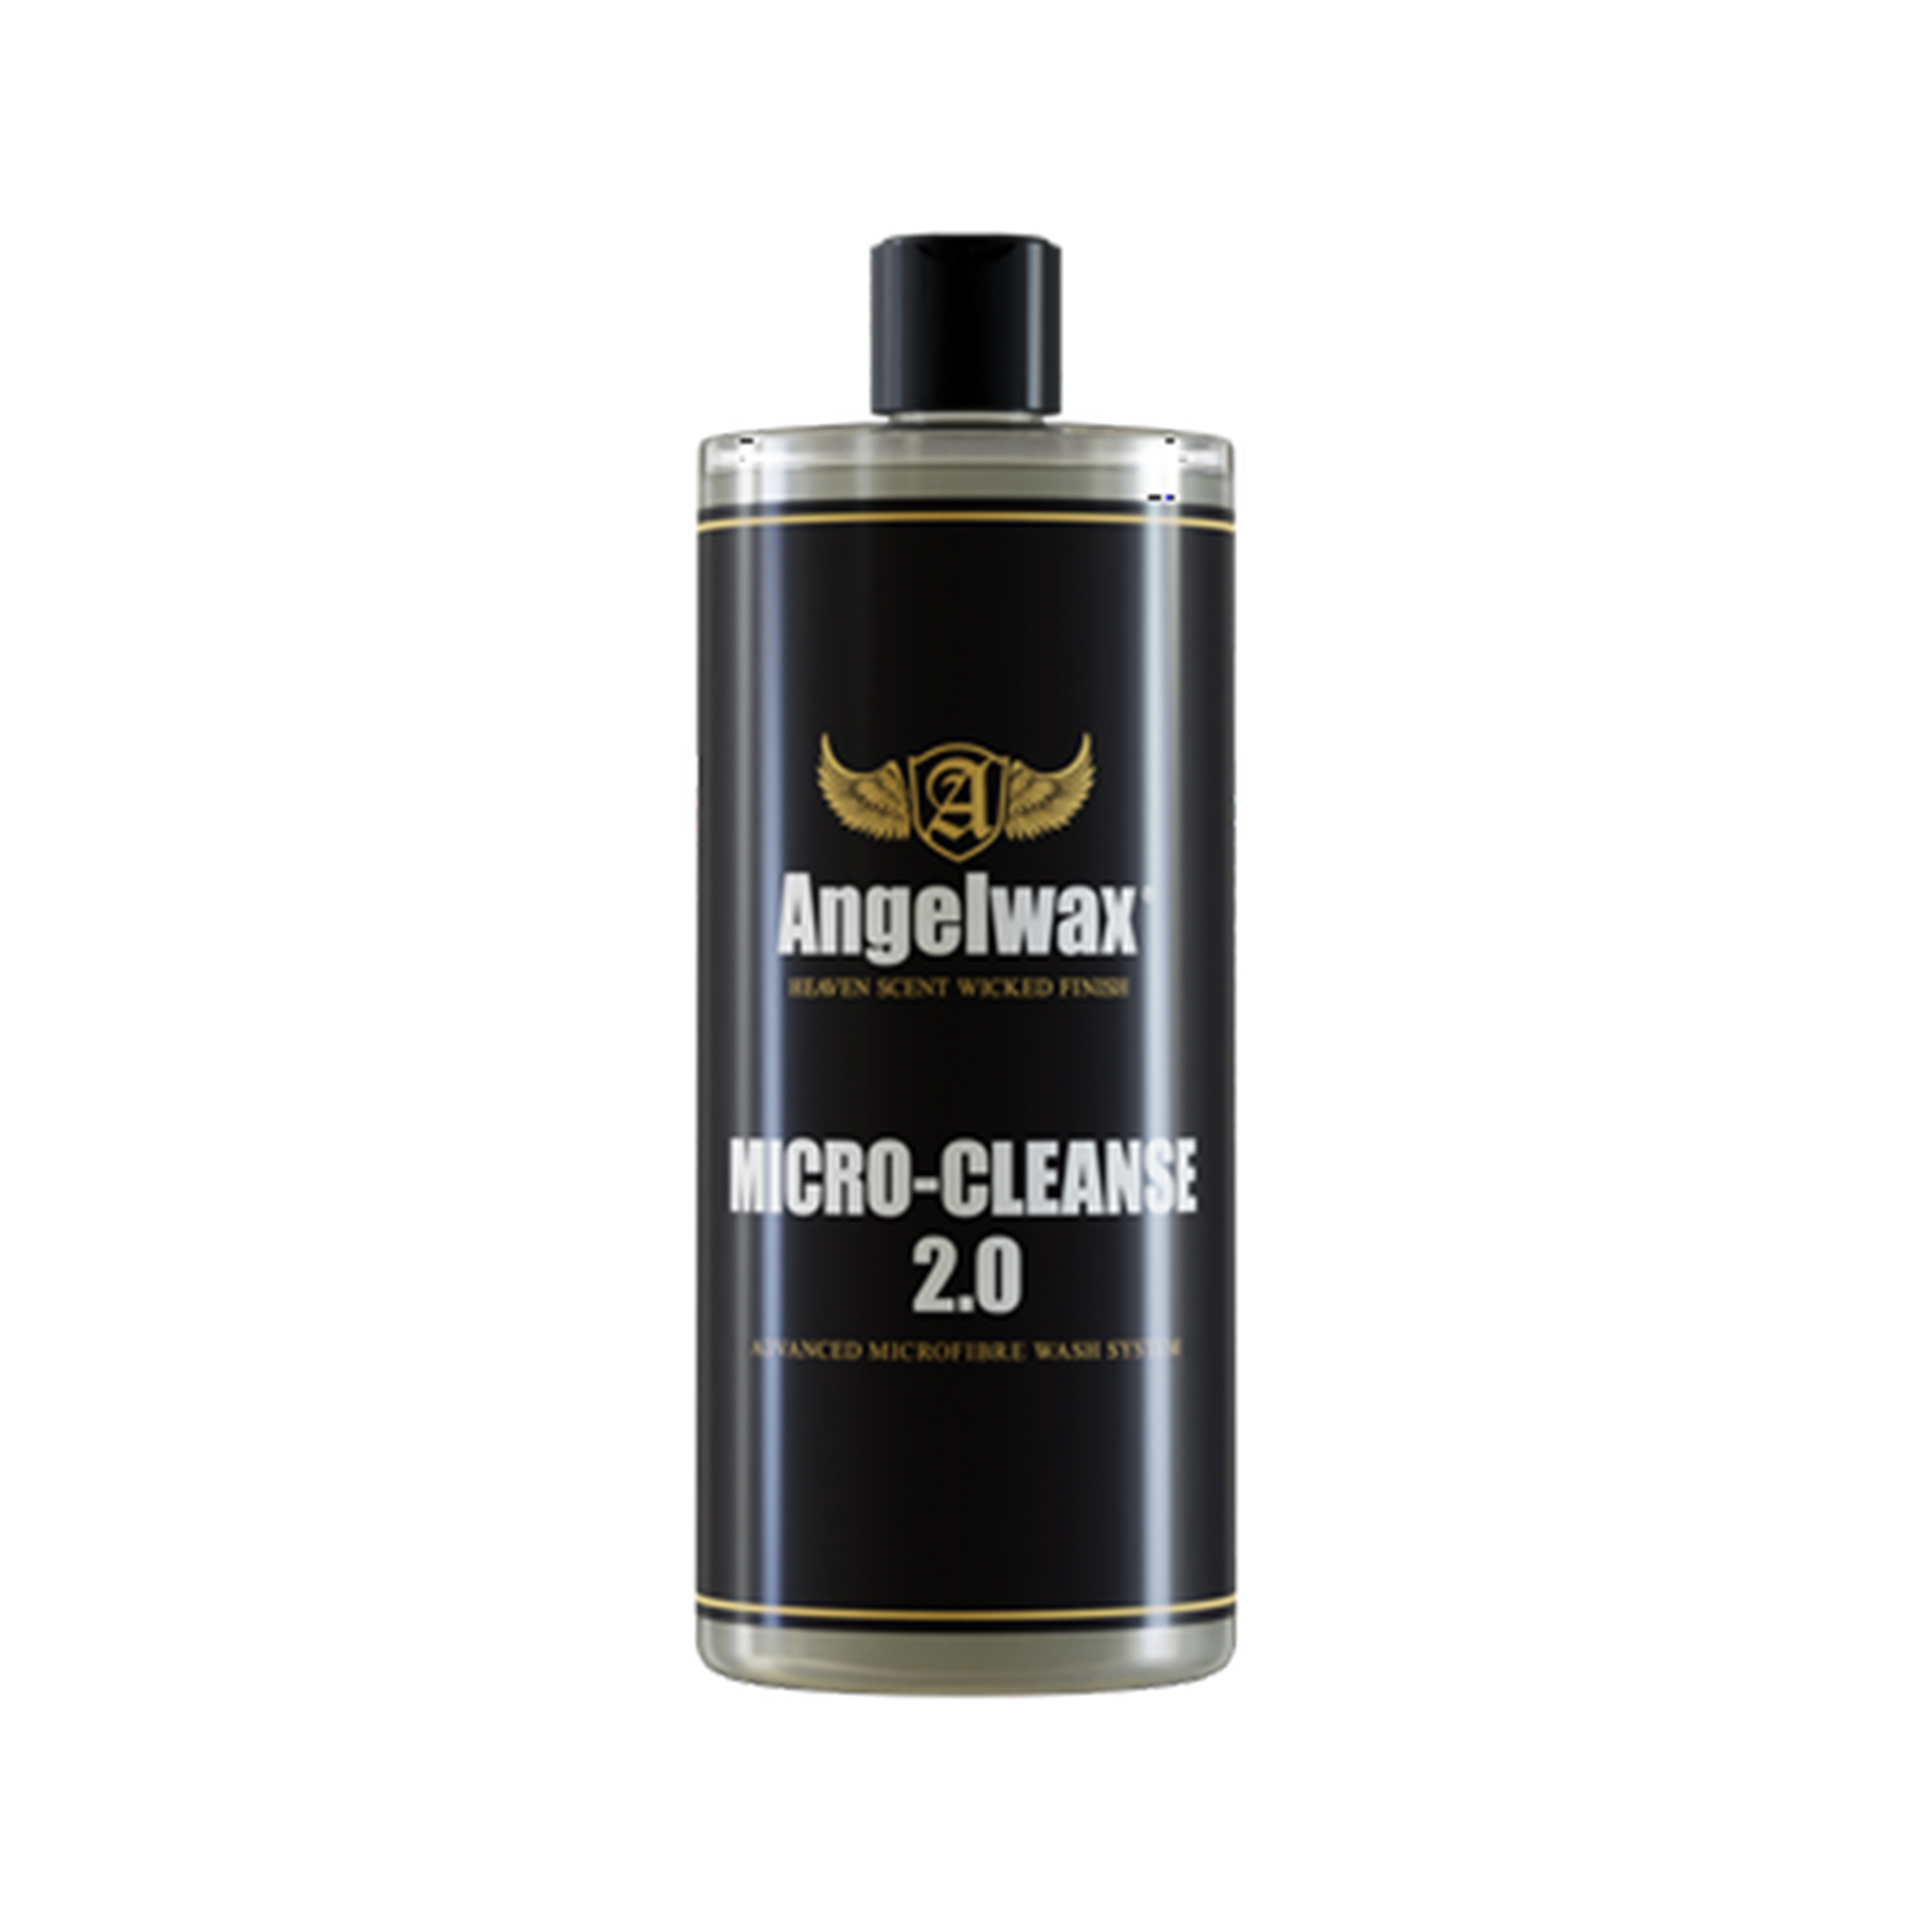 Angelwax Micro-Cleanse 2.0